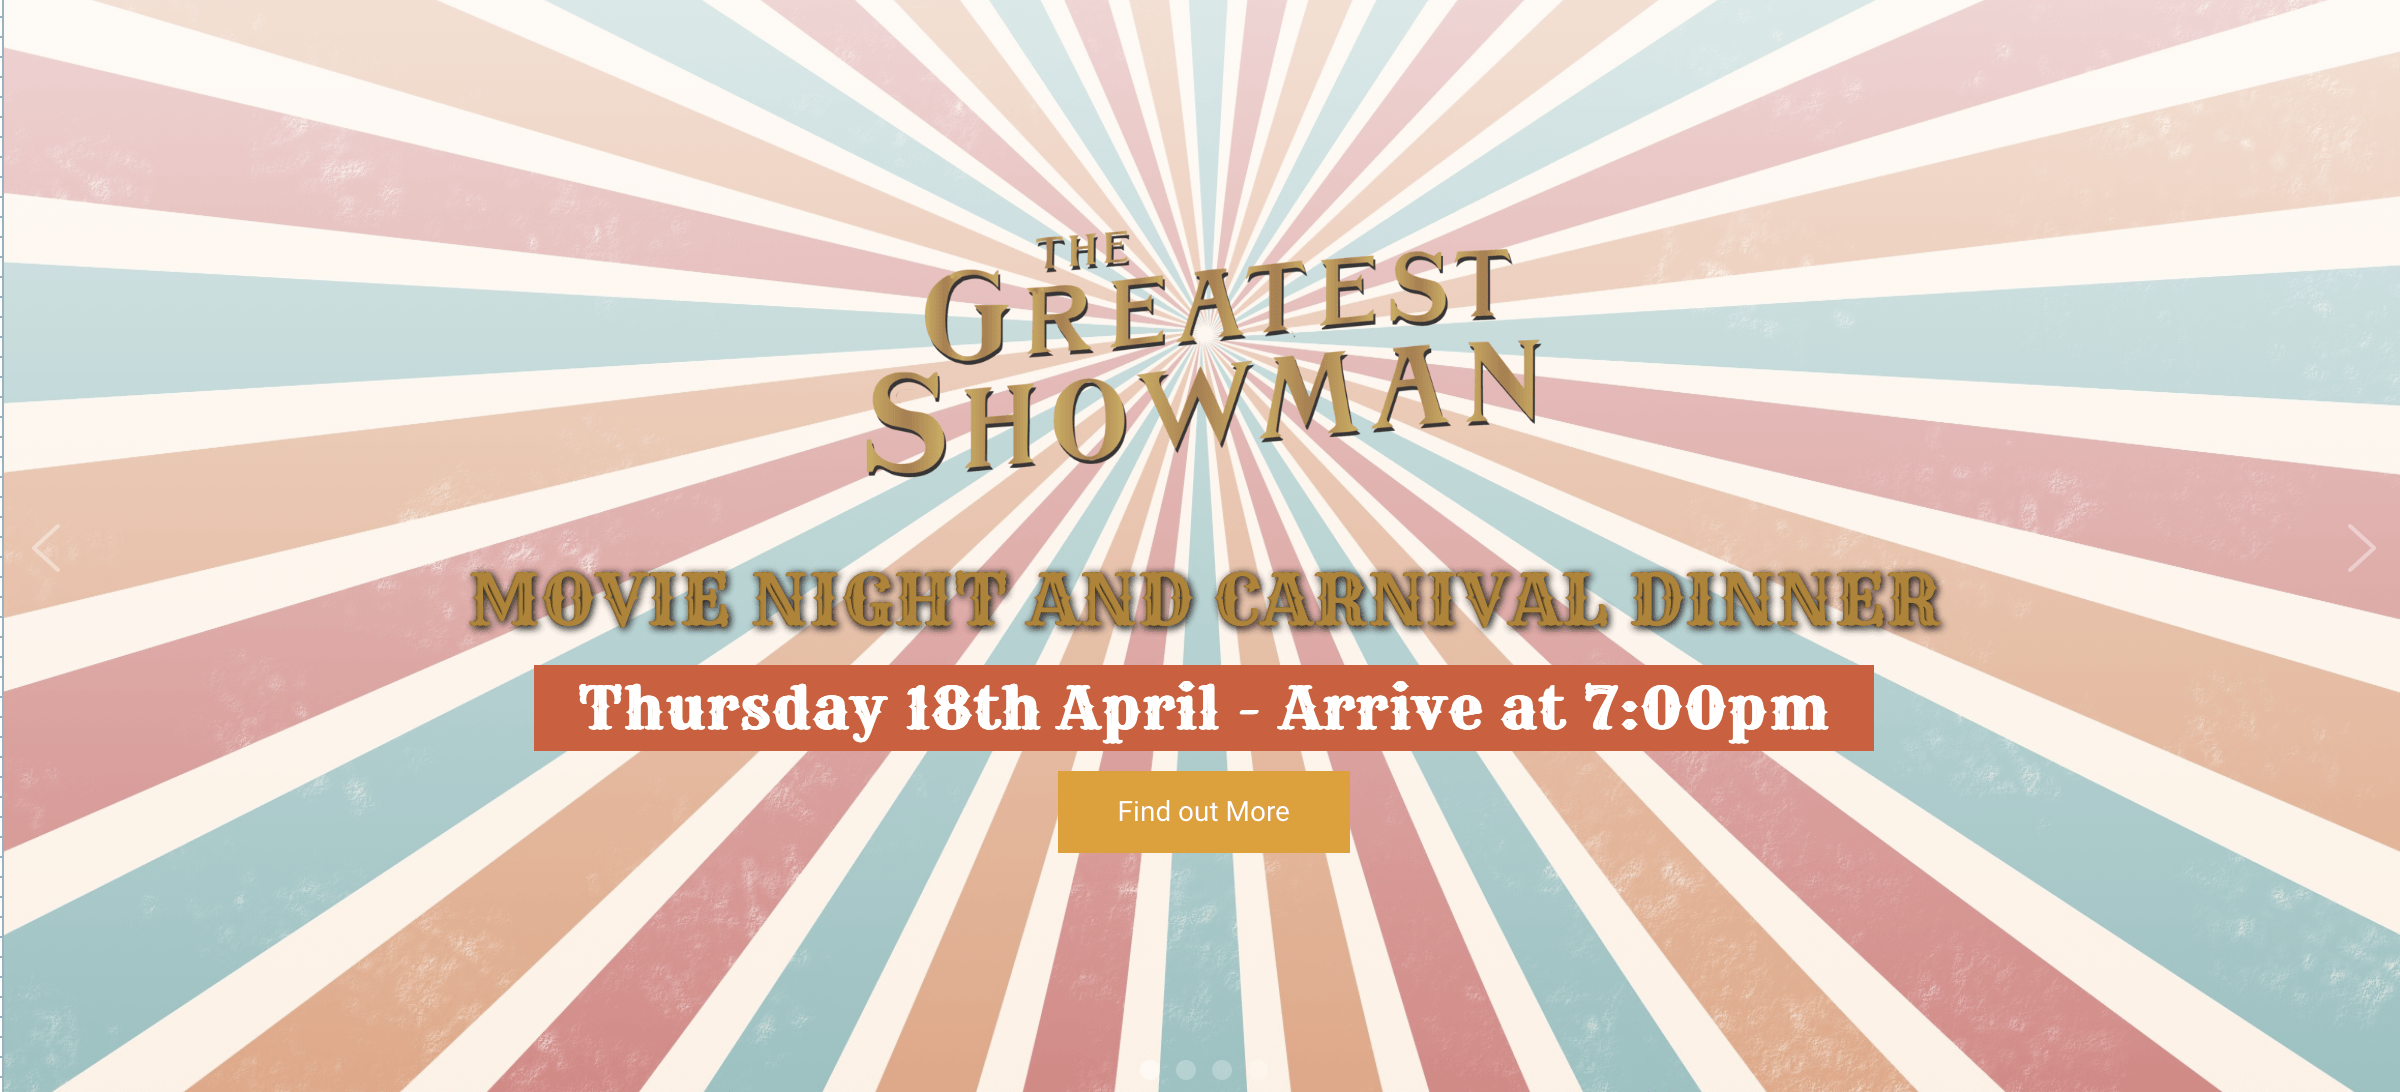 The Greatest Showman - Move Night and Carnival Dinner 